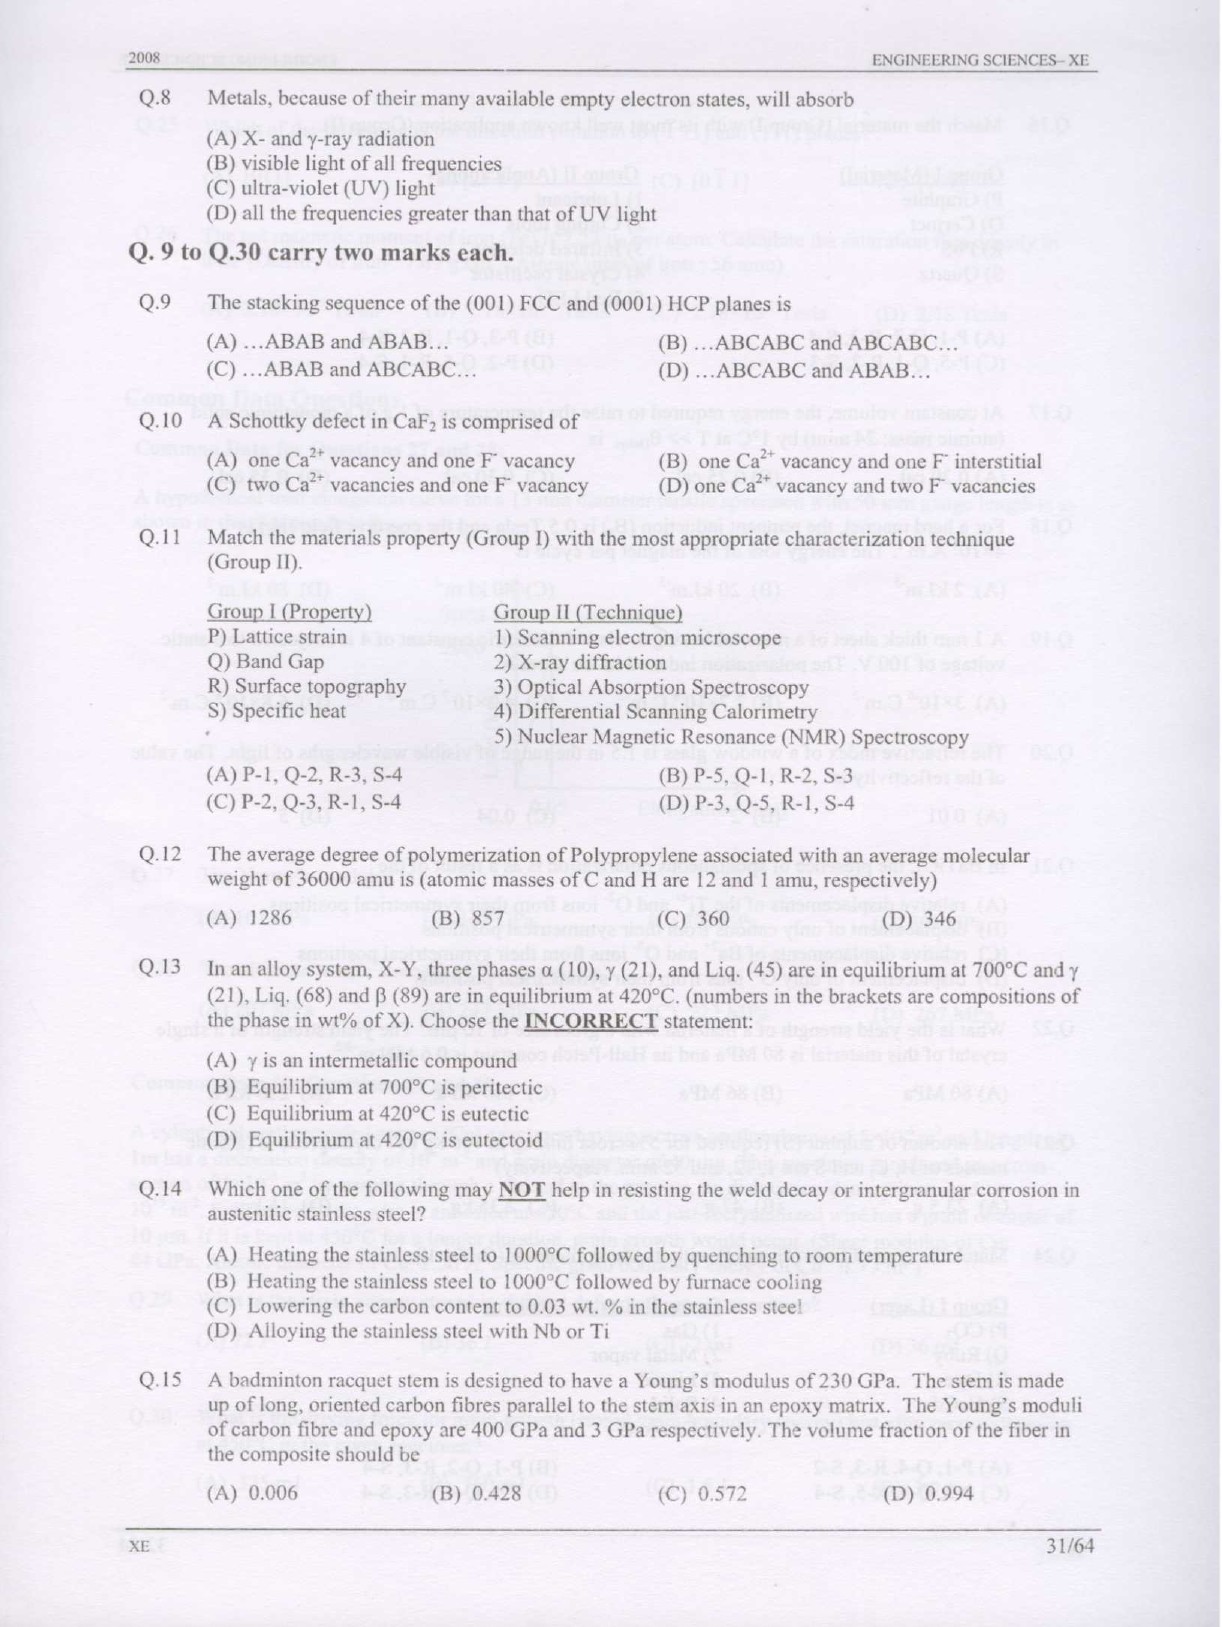 GATE Exam Question Paper 2008 Engineering Sciences 31